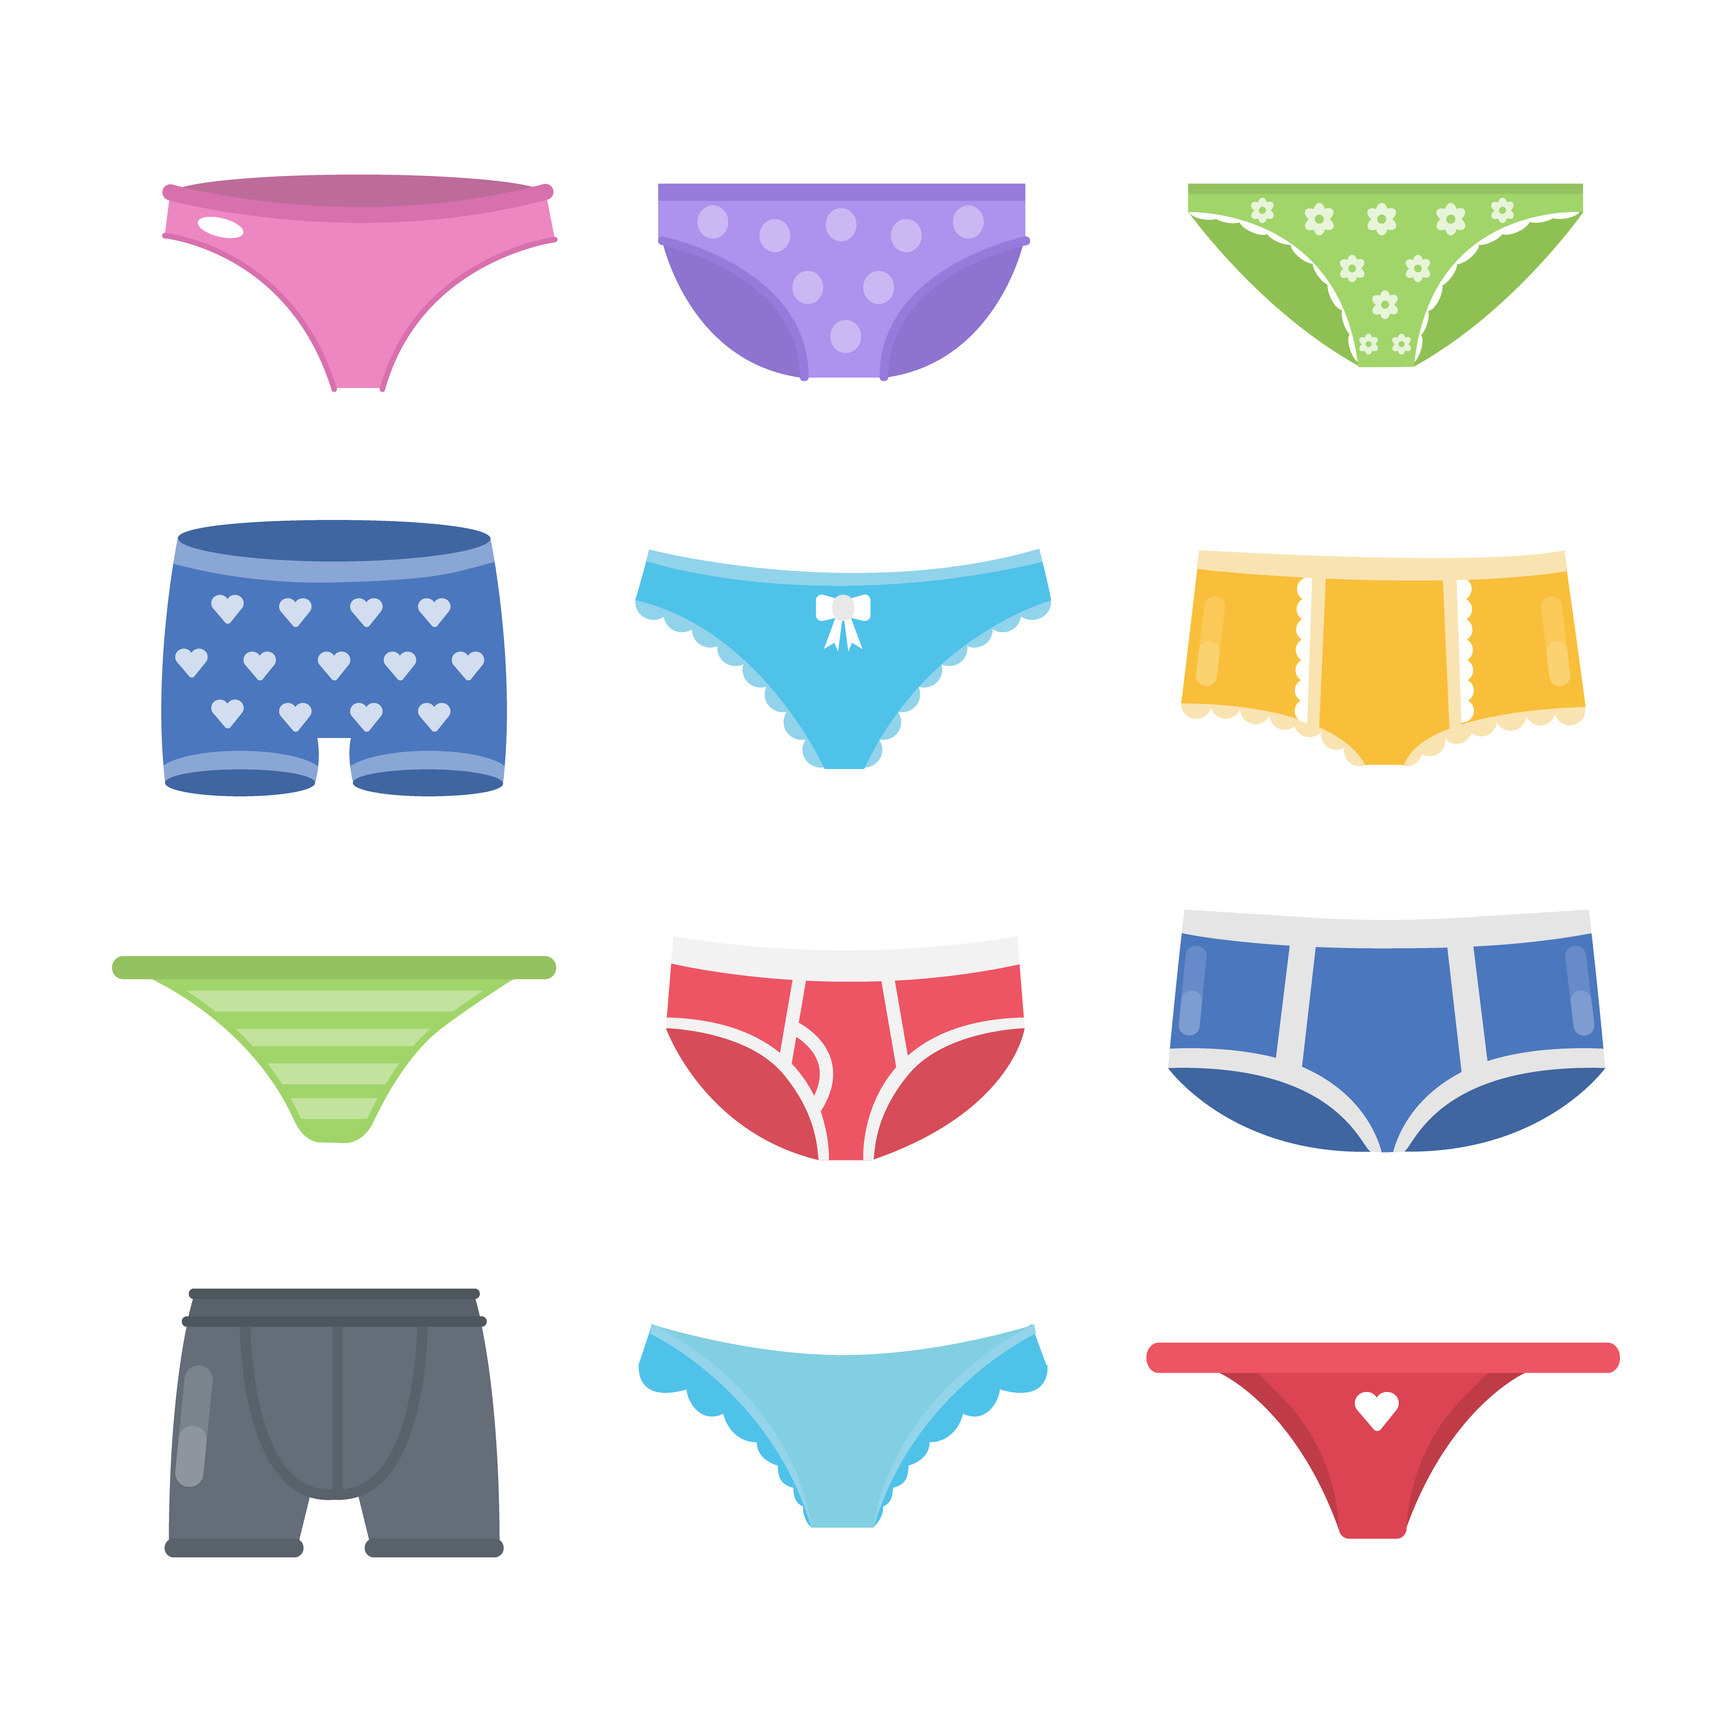 Illustrations of different types of underwear in different colors, including high-cut panties and briefs